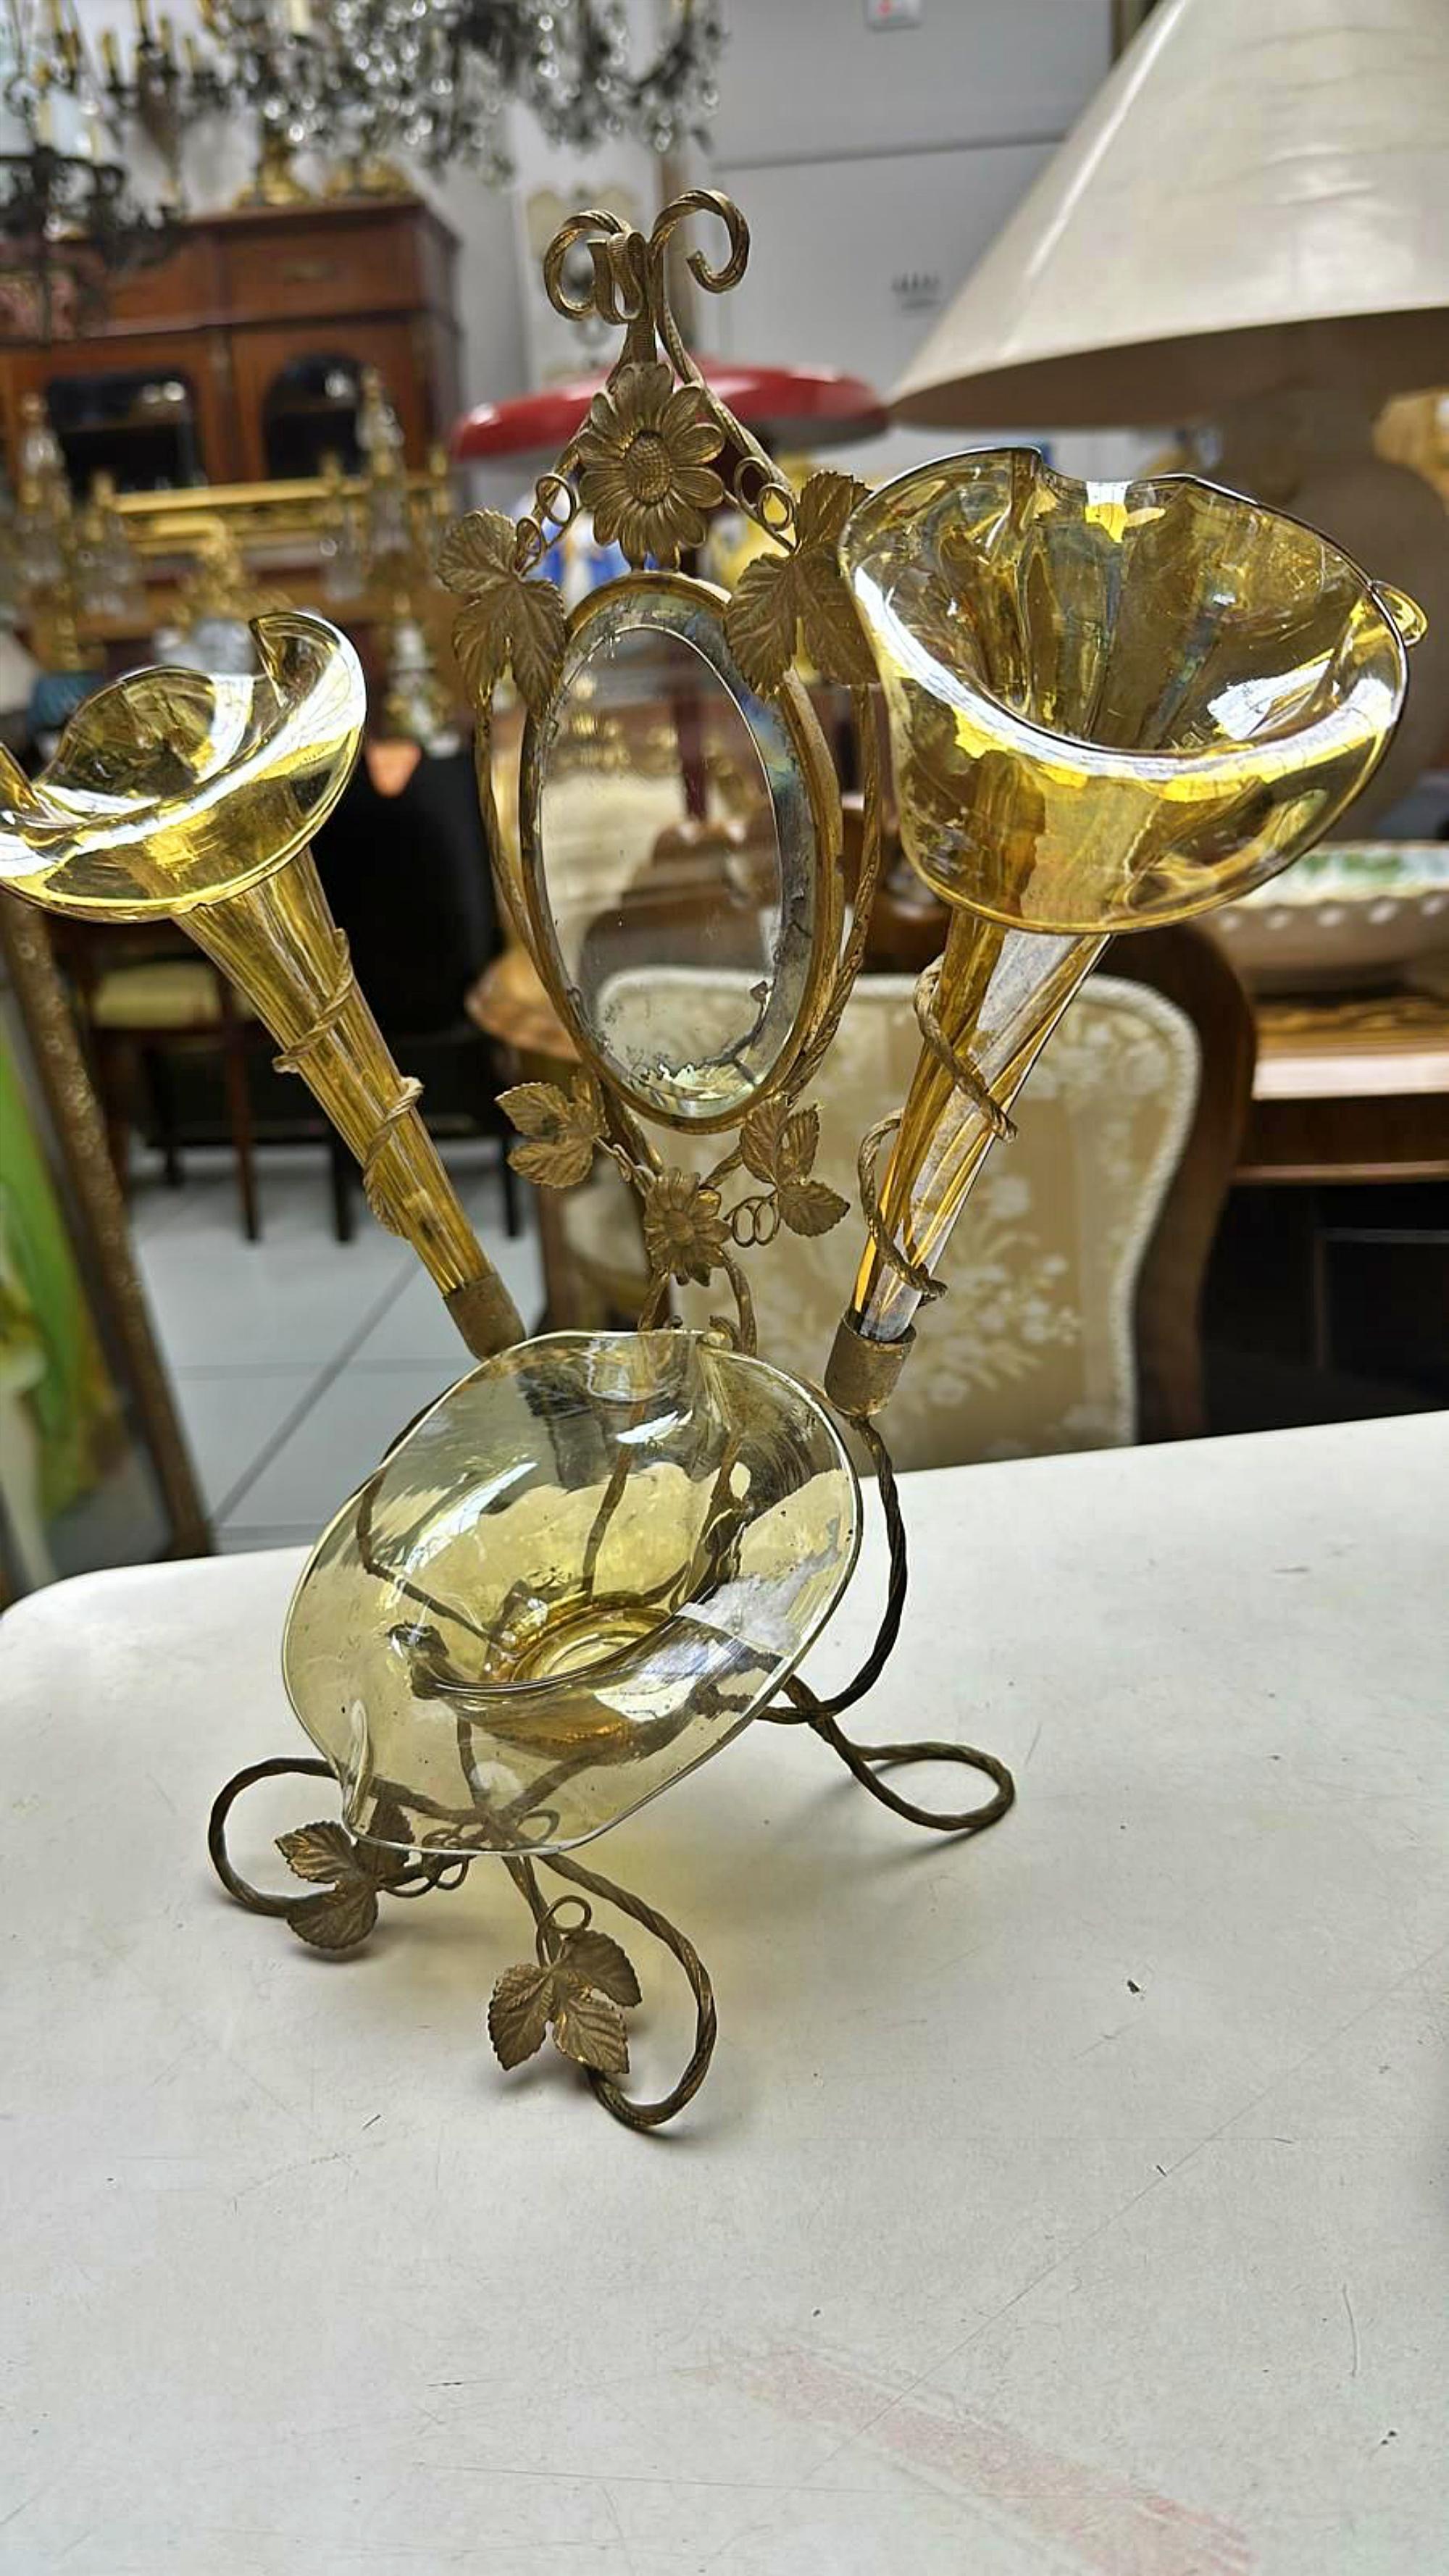 Stunning 19th Century Italian Murano Glass Flower Holder
Art Deco
in brass with mirror and Murano glass glasses,
Glass in straw tones
31cm x 32cm
excellent condition, the glass is without breakages or scratches